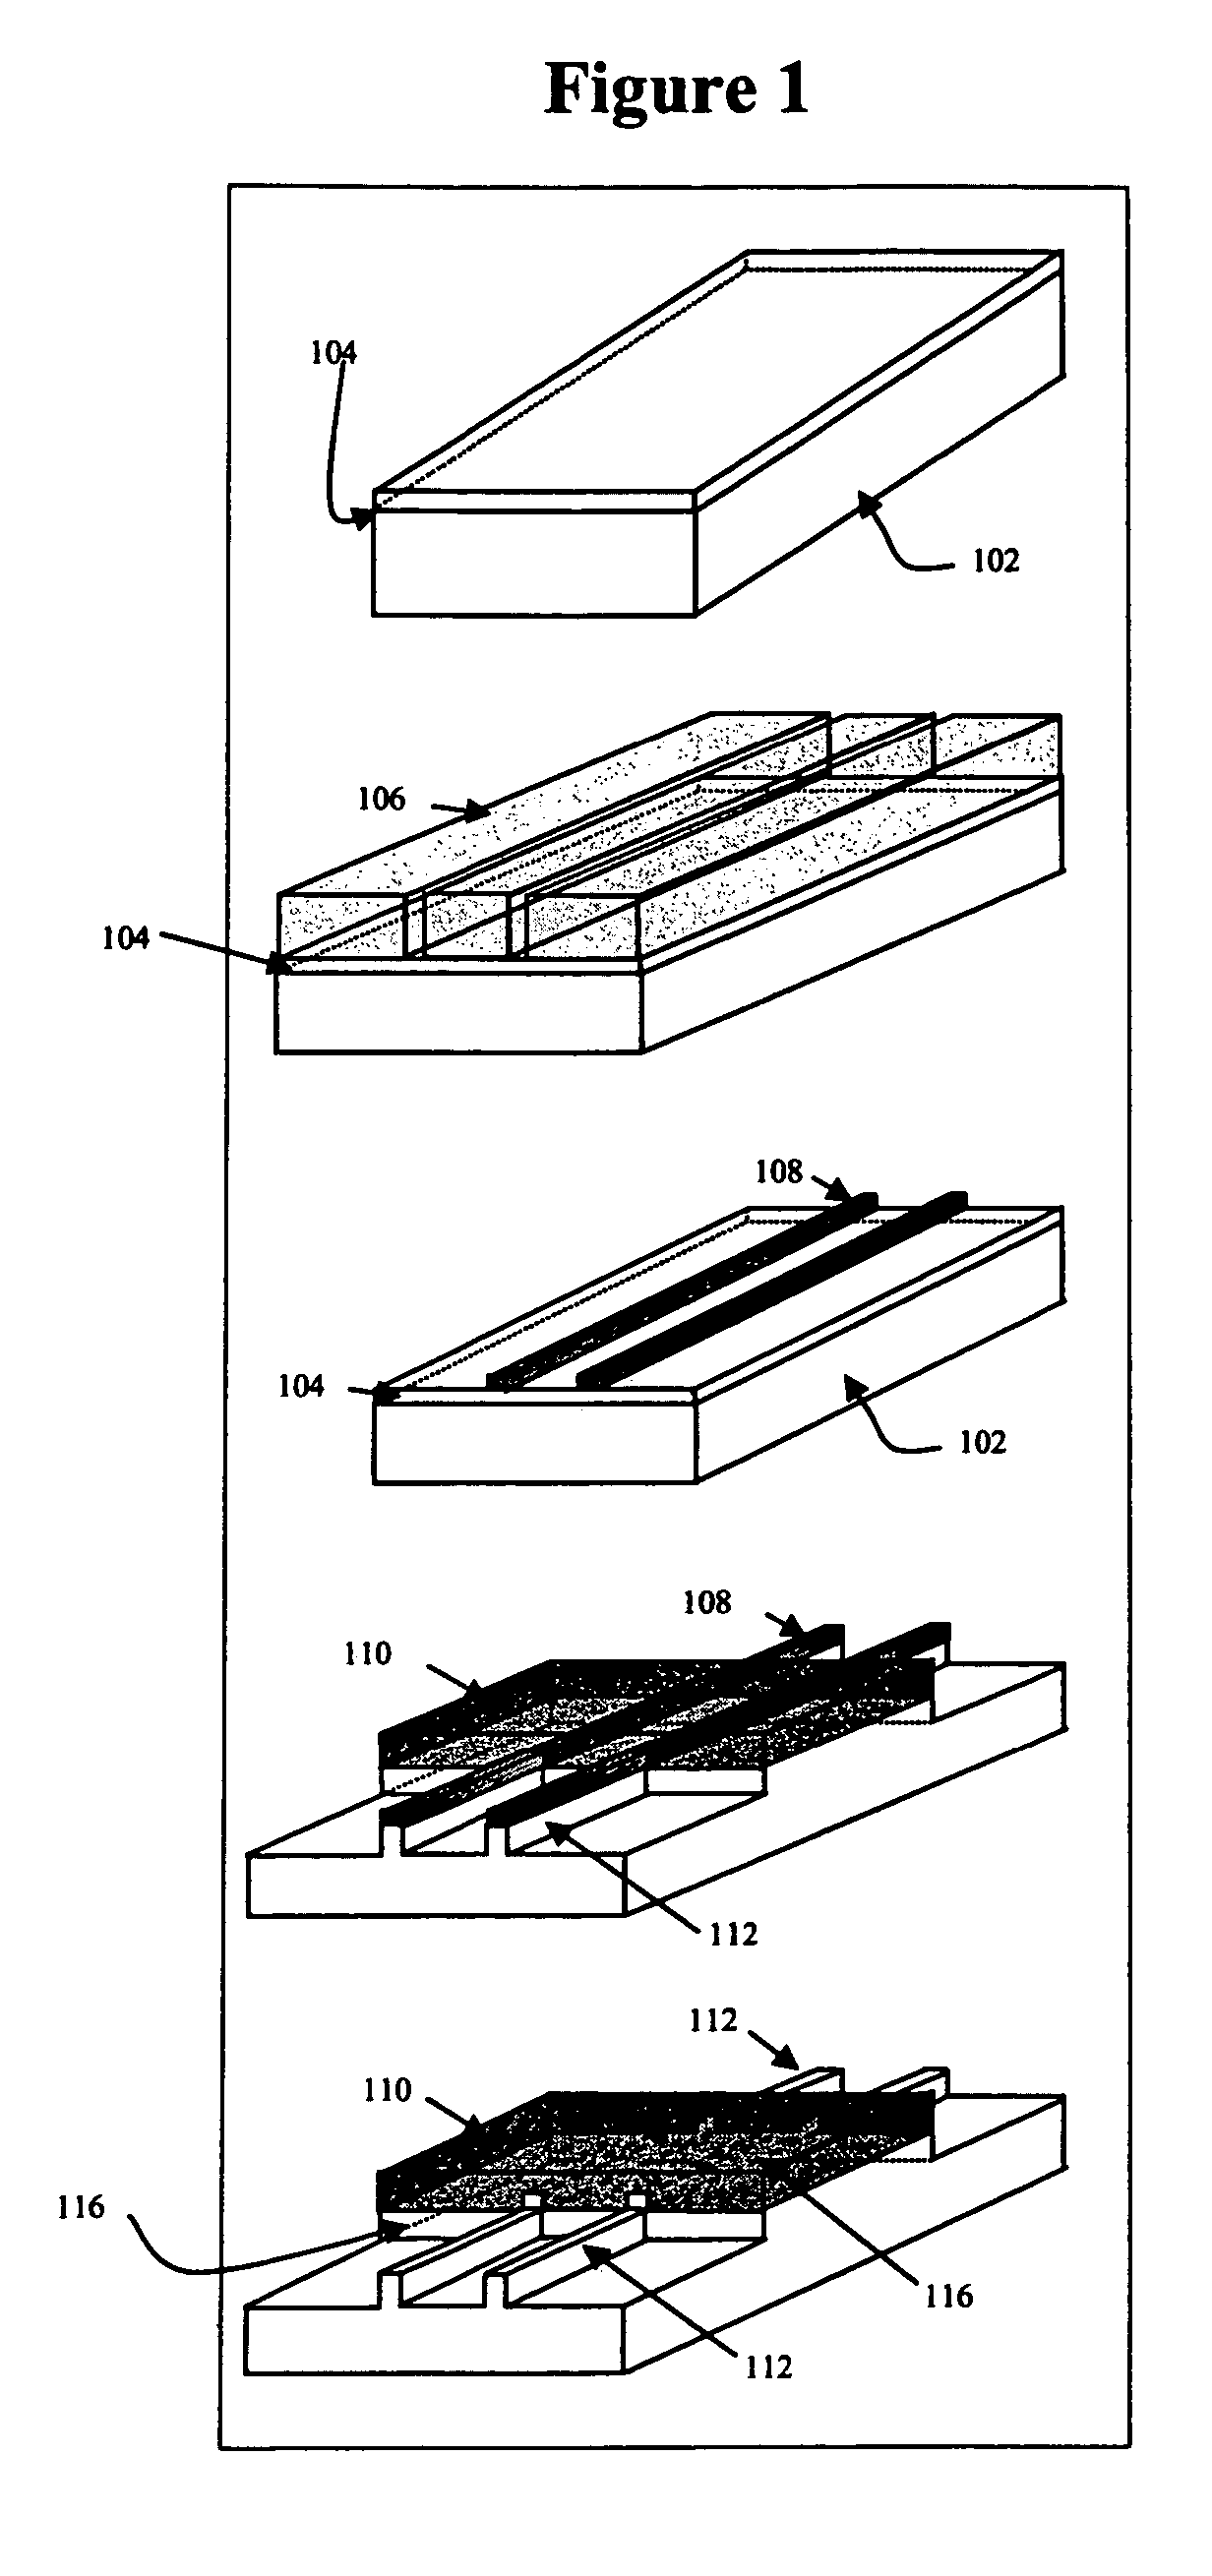 Controlled nanowire growth in permanent, integrated nano-templates and methods of fabricating sensor and transducer structures